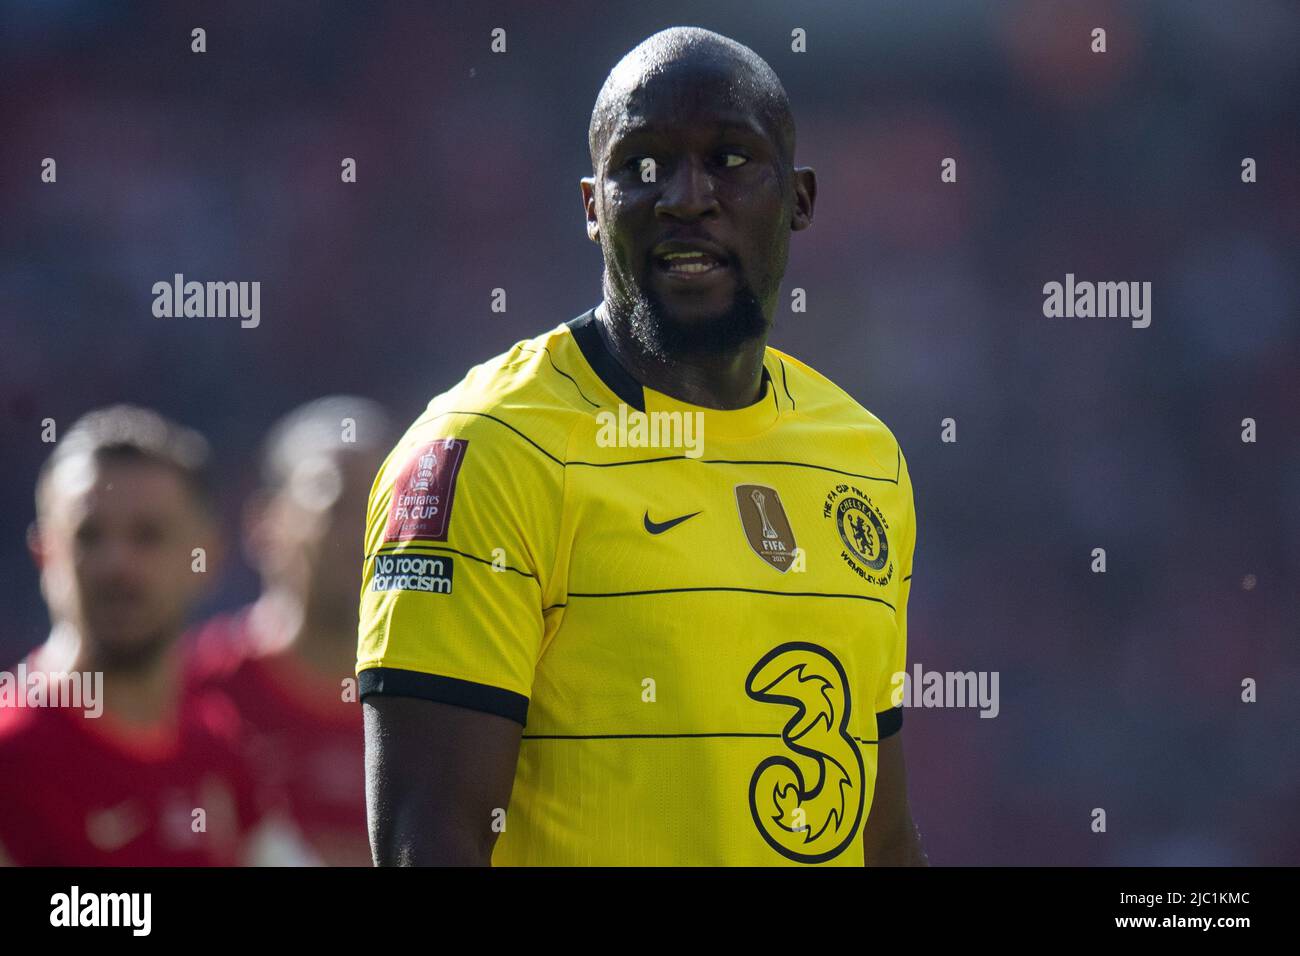 LONDON, ENGLAND - MAY 14: Romelu Lukaku of Chelsea looks on during The FA Cup Final match between Chelsea and Liverpool at Wembley Stadium on May 14, Stock Photo